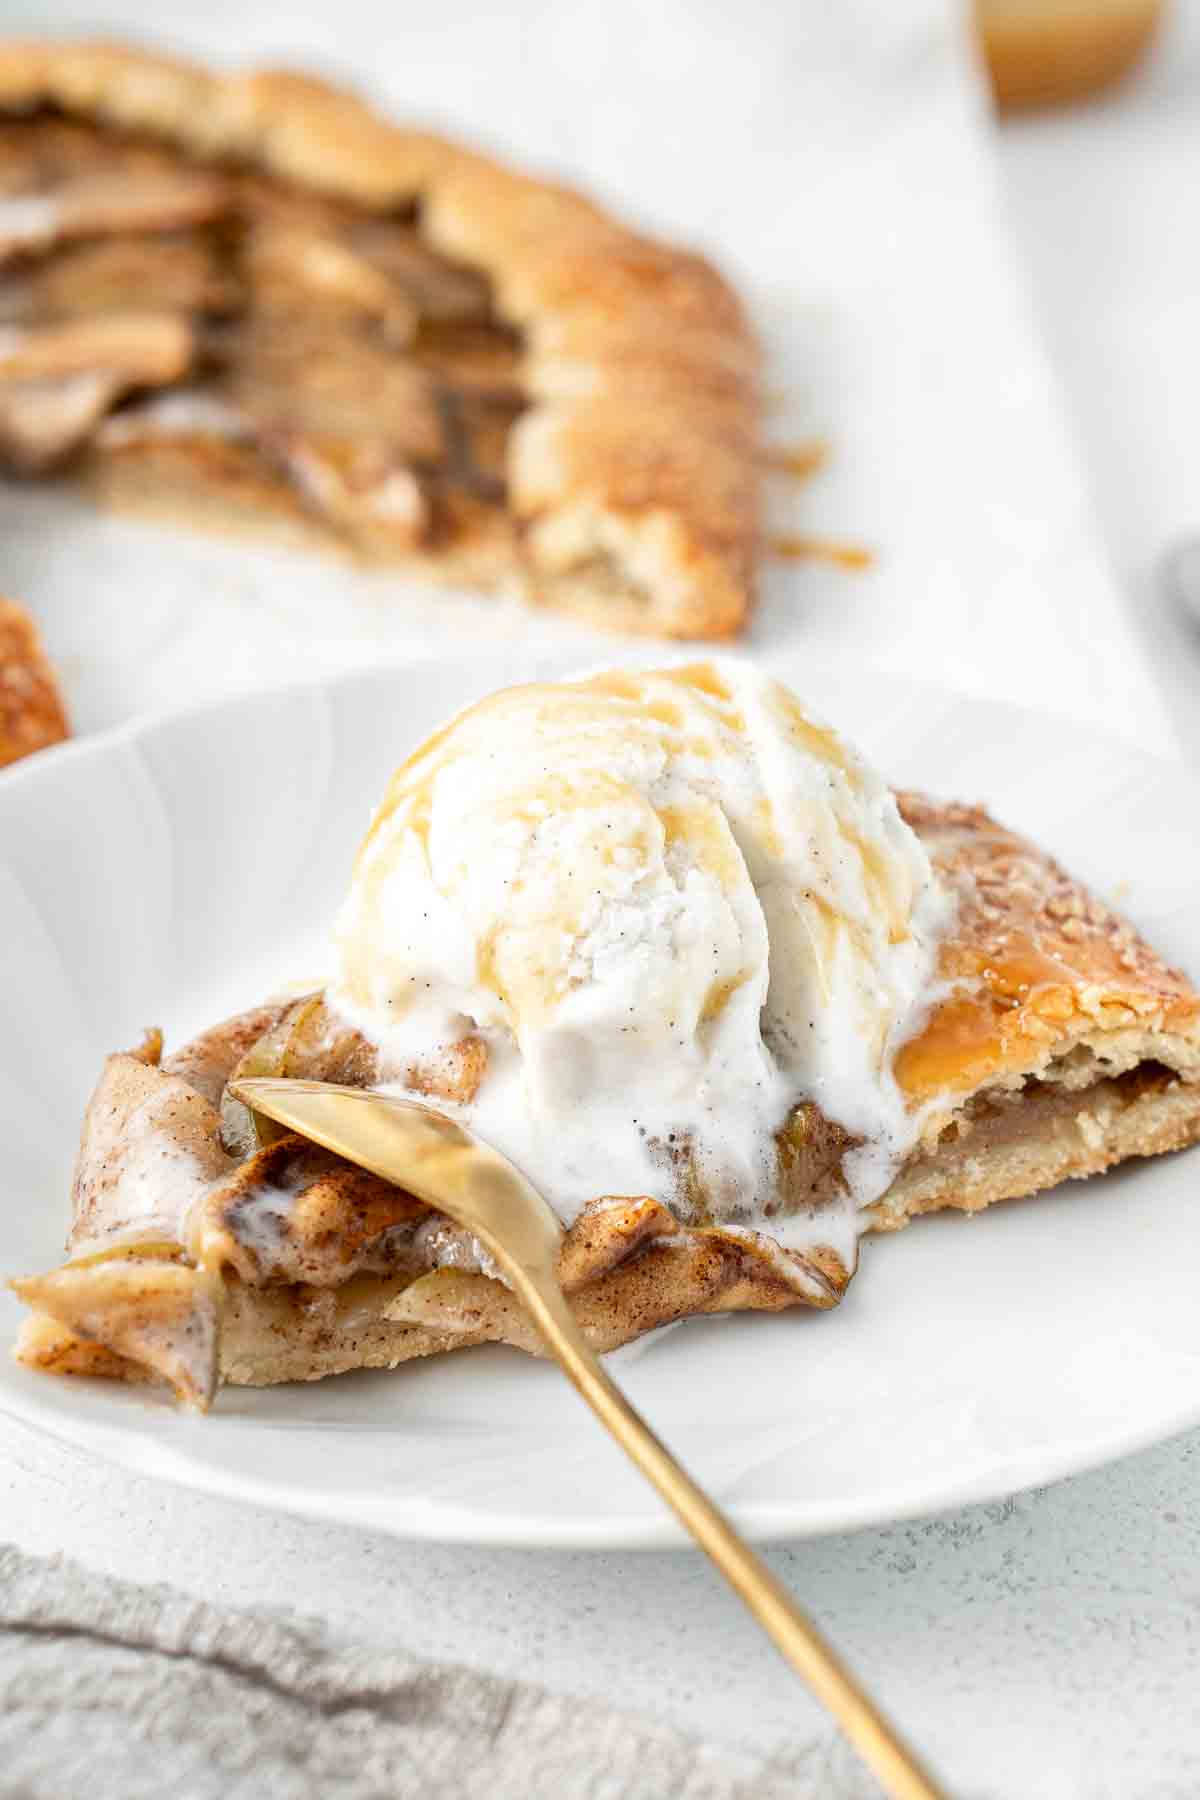 A slice of caramel apple galette with ice cream and a spoon taking a bite.